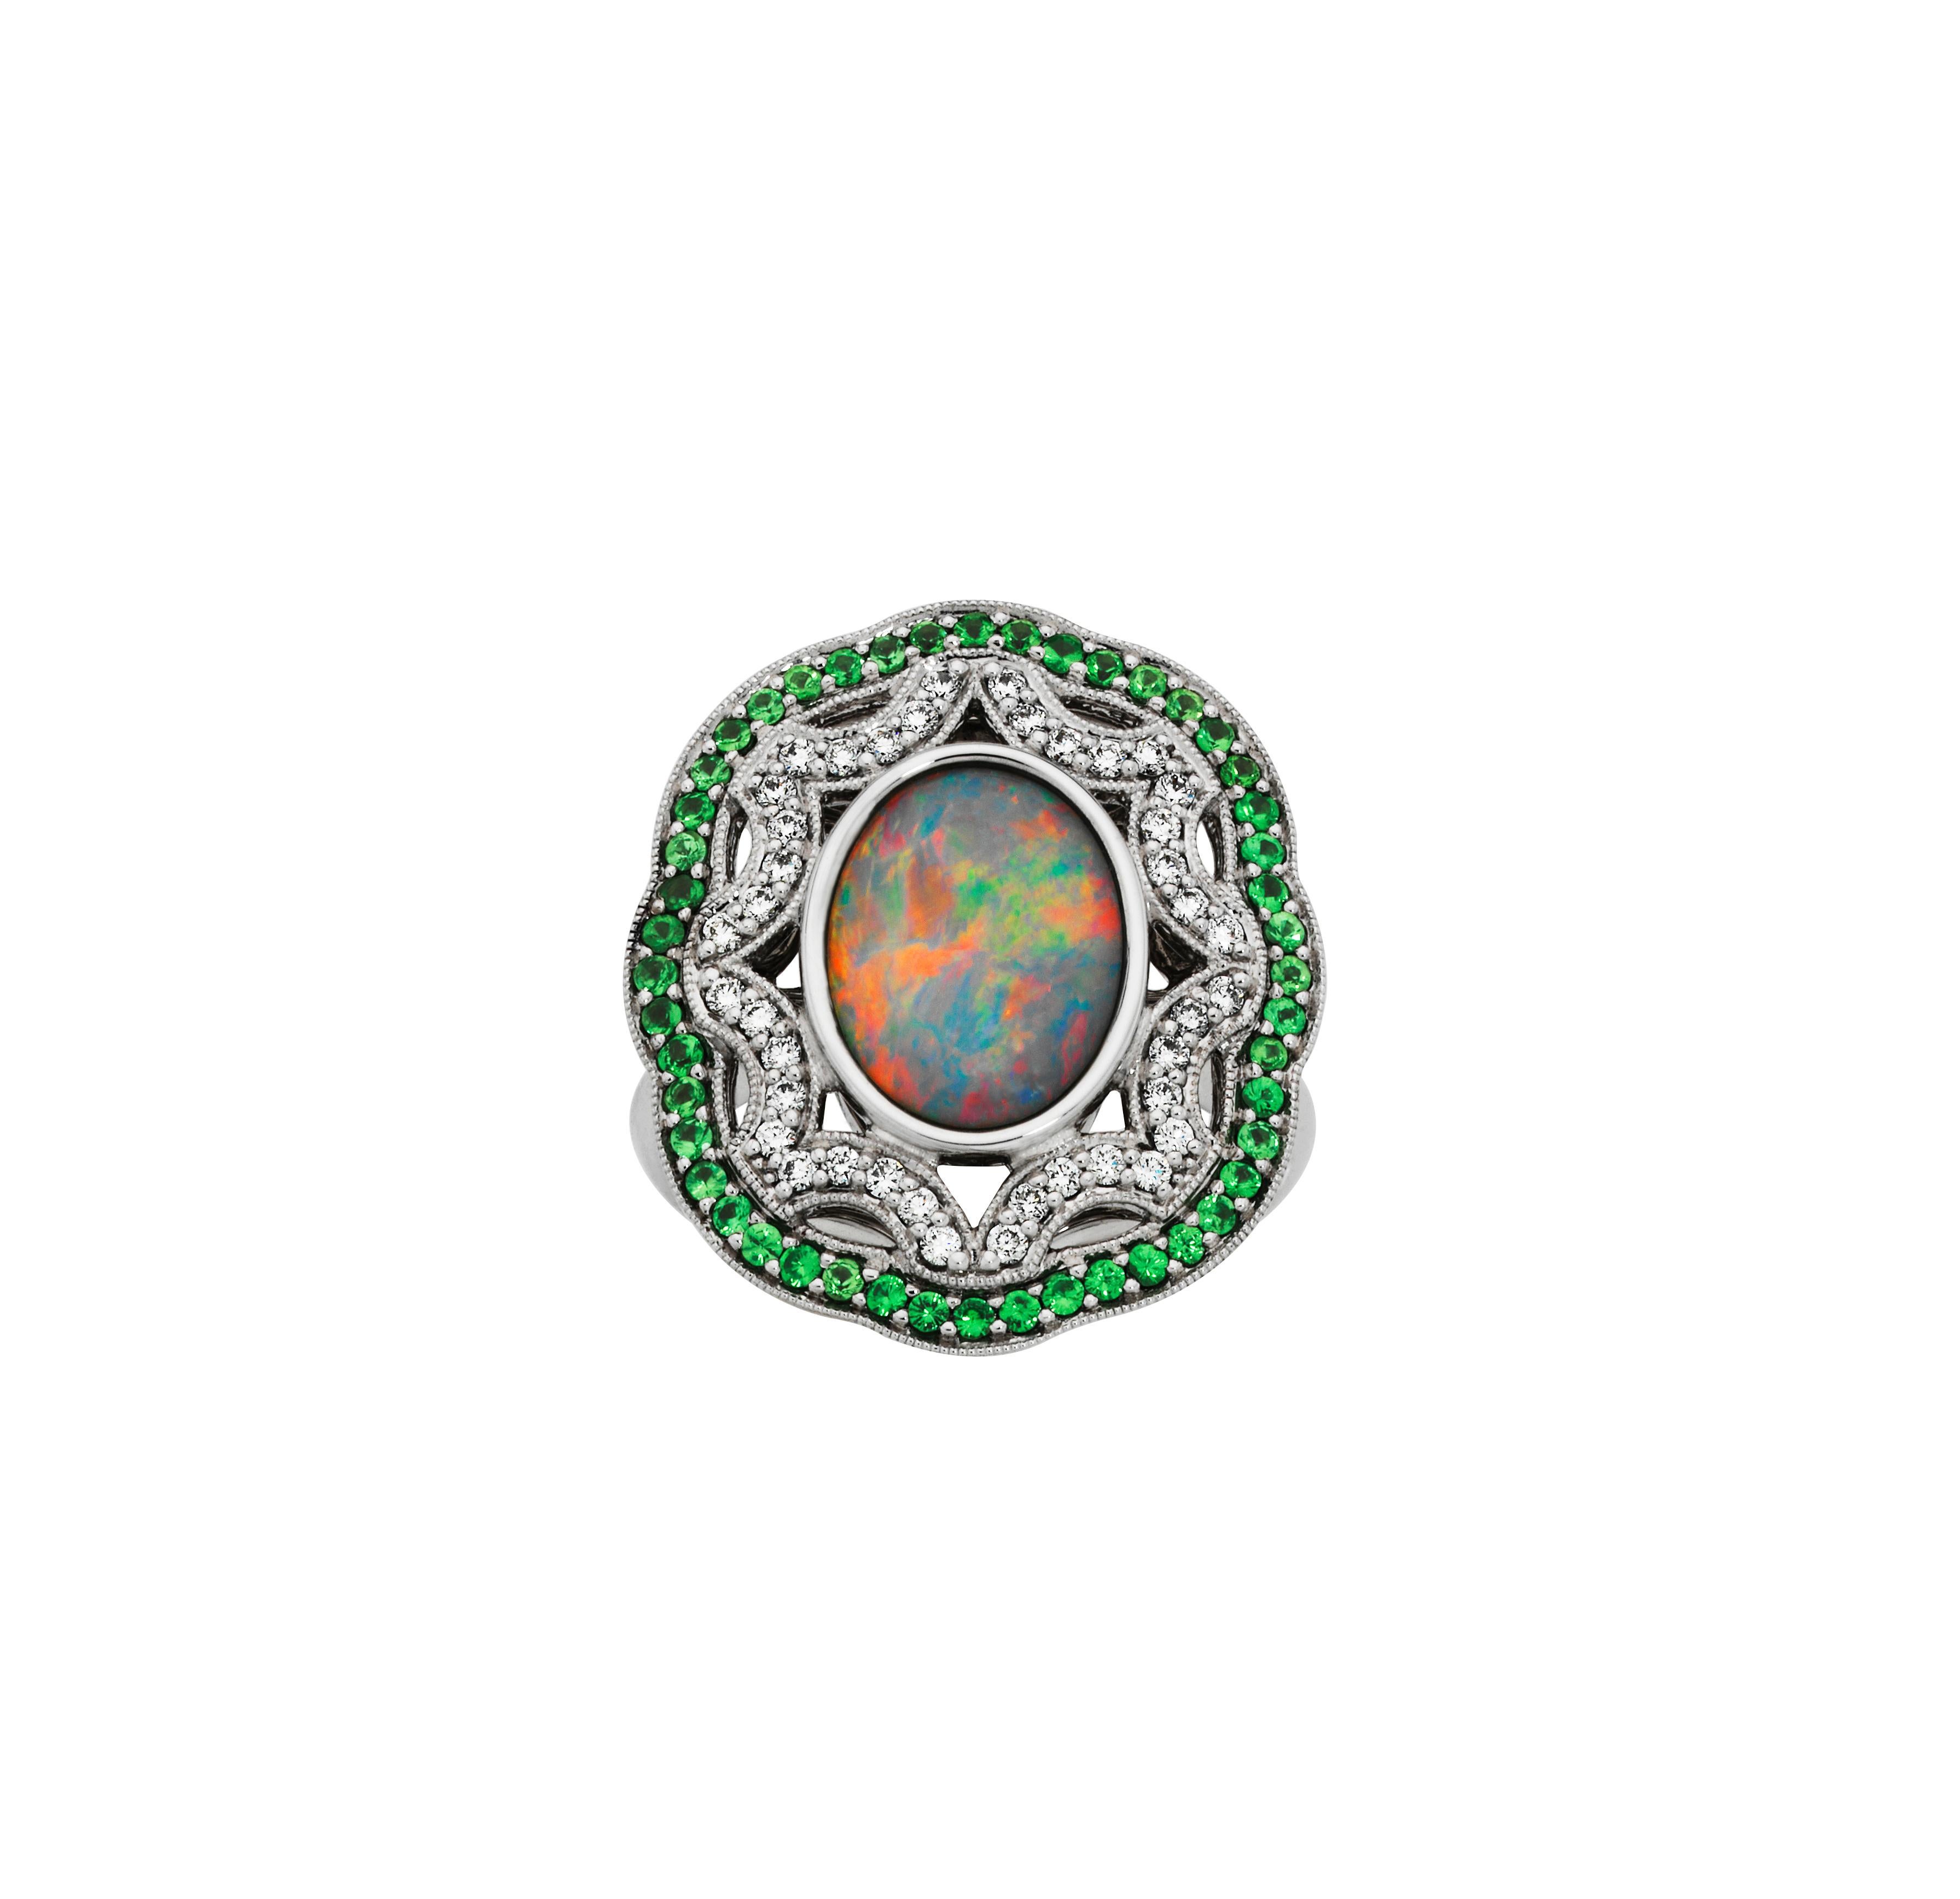 Giulians handcrafted Art Deco inspired 1.70ct light black opal, tsavorite garnet and diamond Ring.  This ring features an oval cabochon cut, natural, solid Australian black opal with bright multi-colour fire,  in an 18 karat white gold bezel